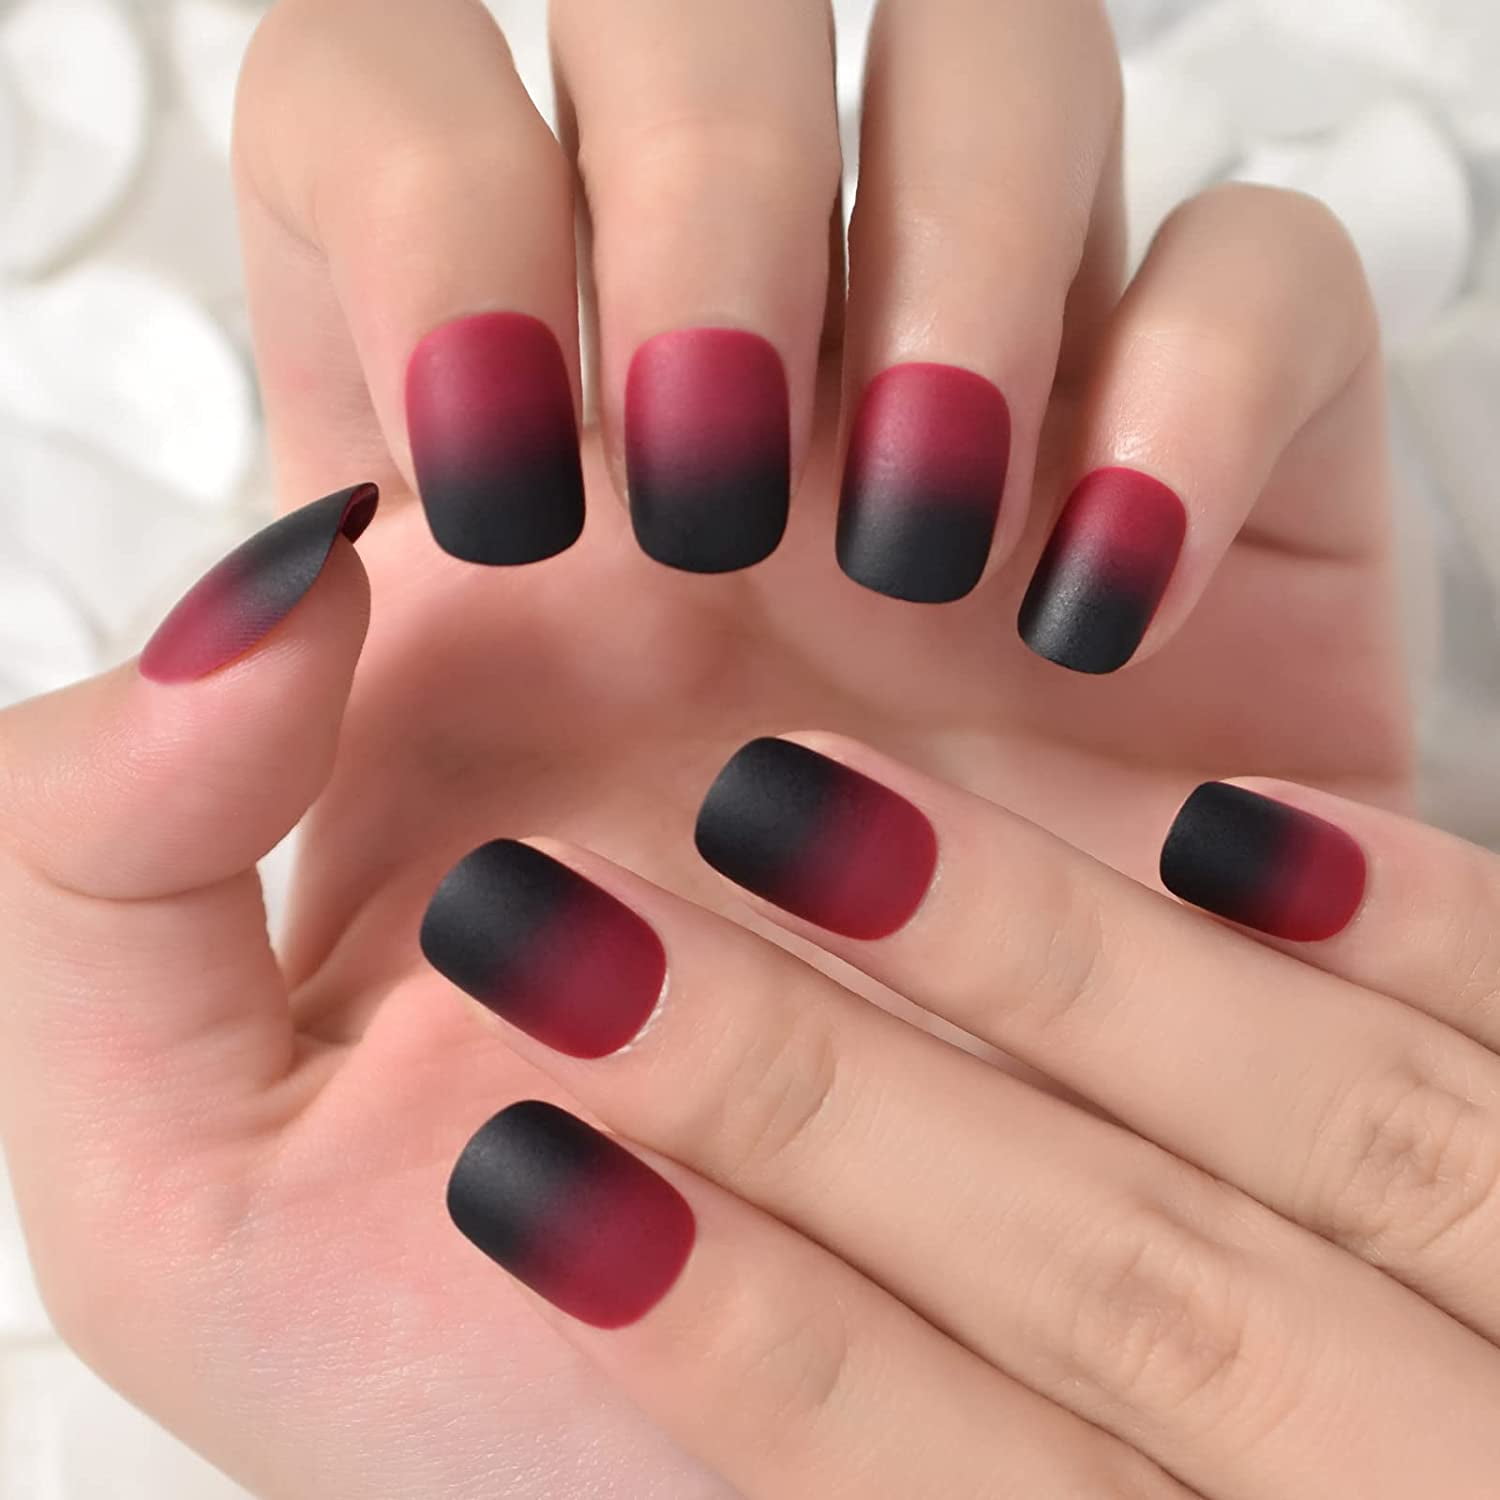 Ungkarl median kvælende Rubber Matte Dark Red Black Press on False Nails Short Squoval Salon DIY  Manicure Reusable Fake Acrylic Nail Art Tips for Daily with Jelly Adhesive  Tabs Nail File - Walmart.com